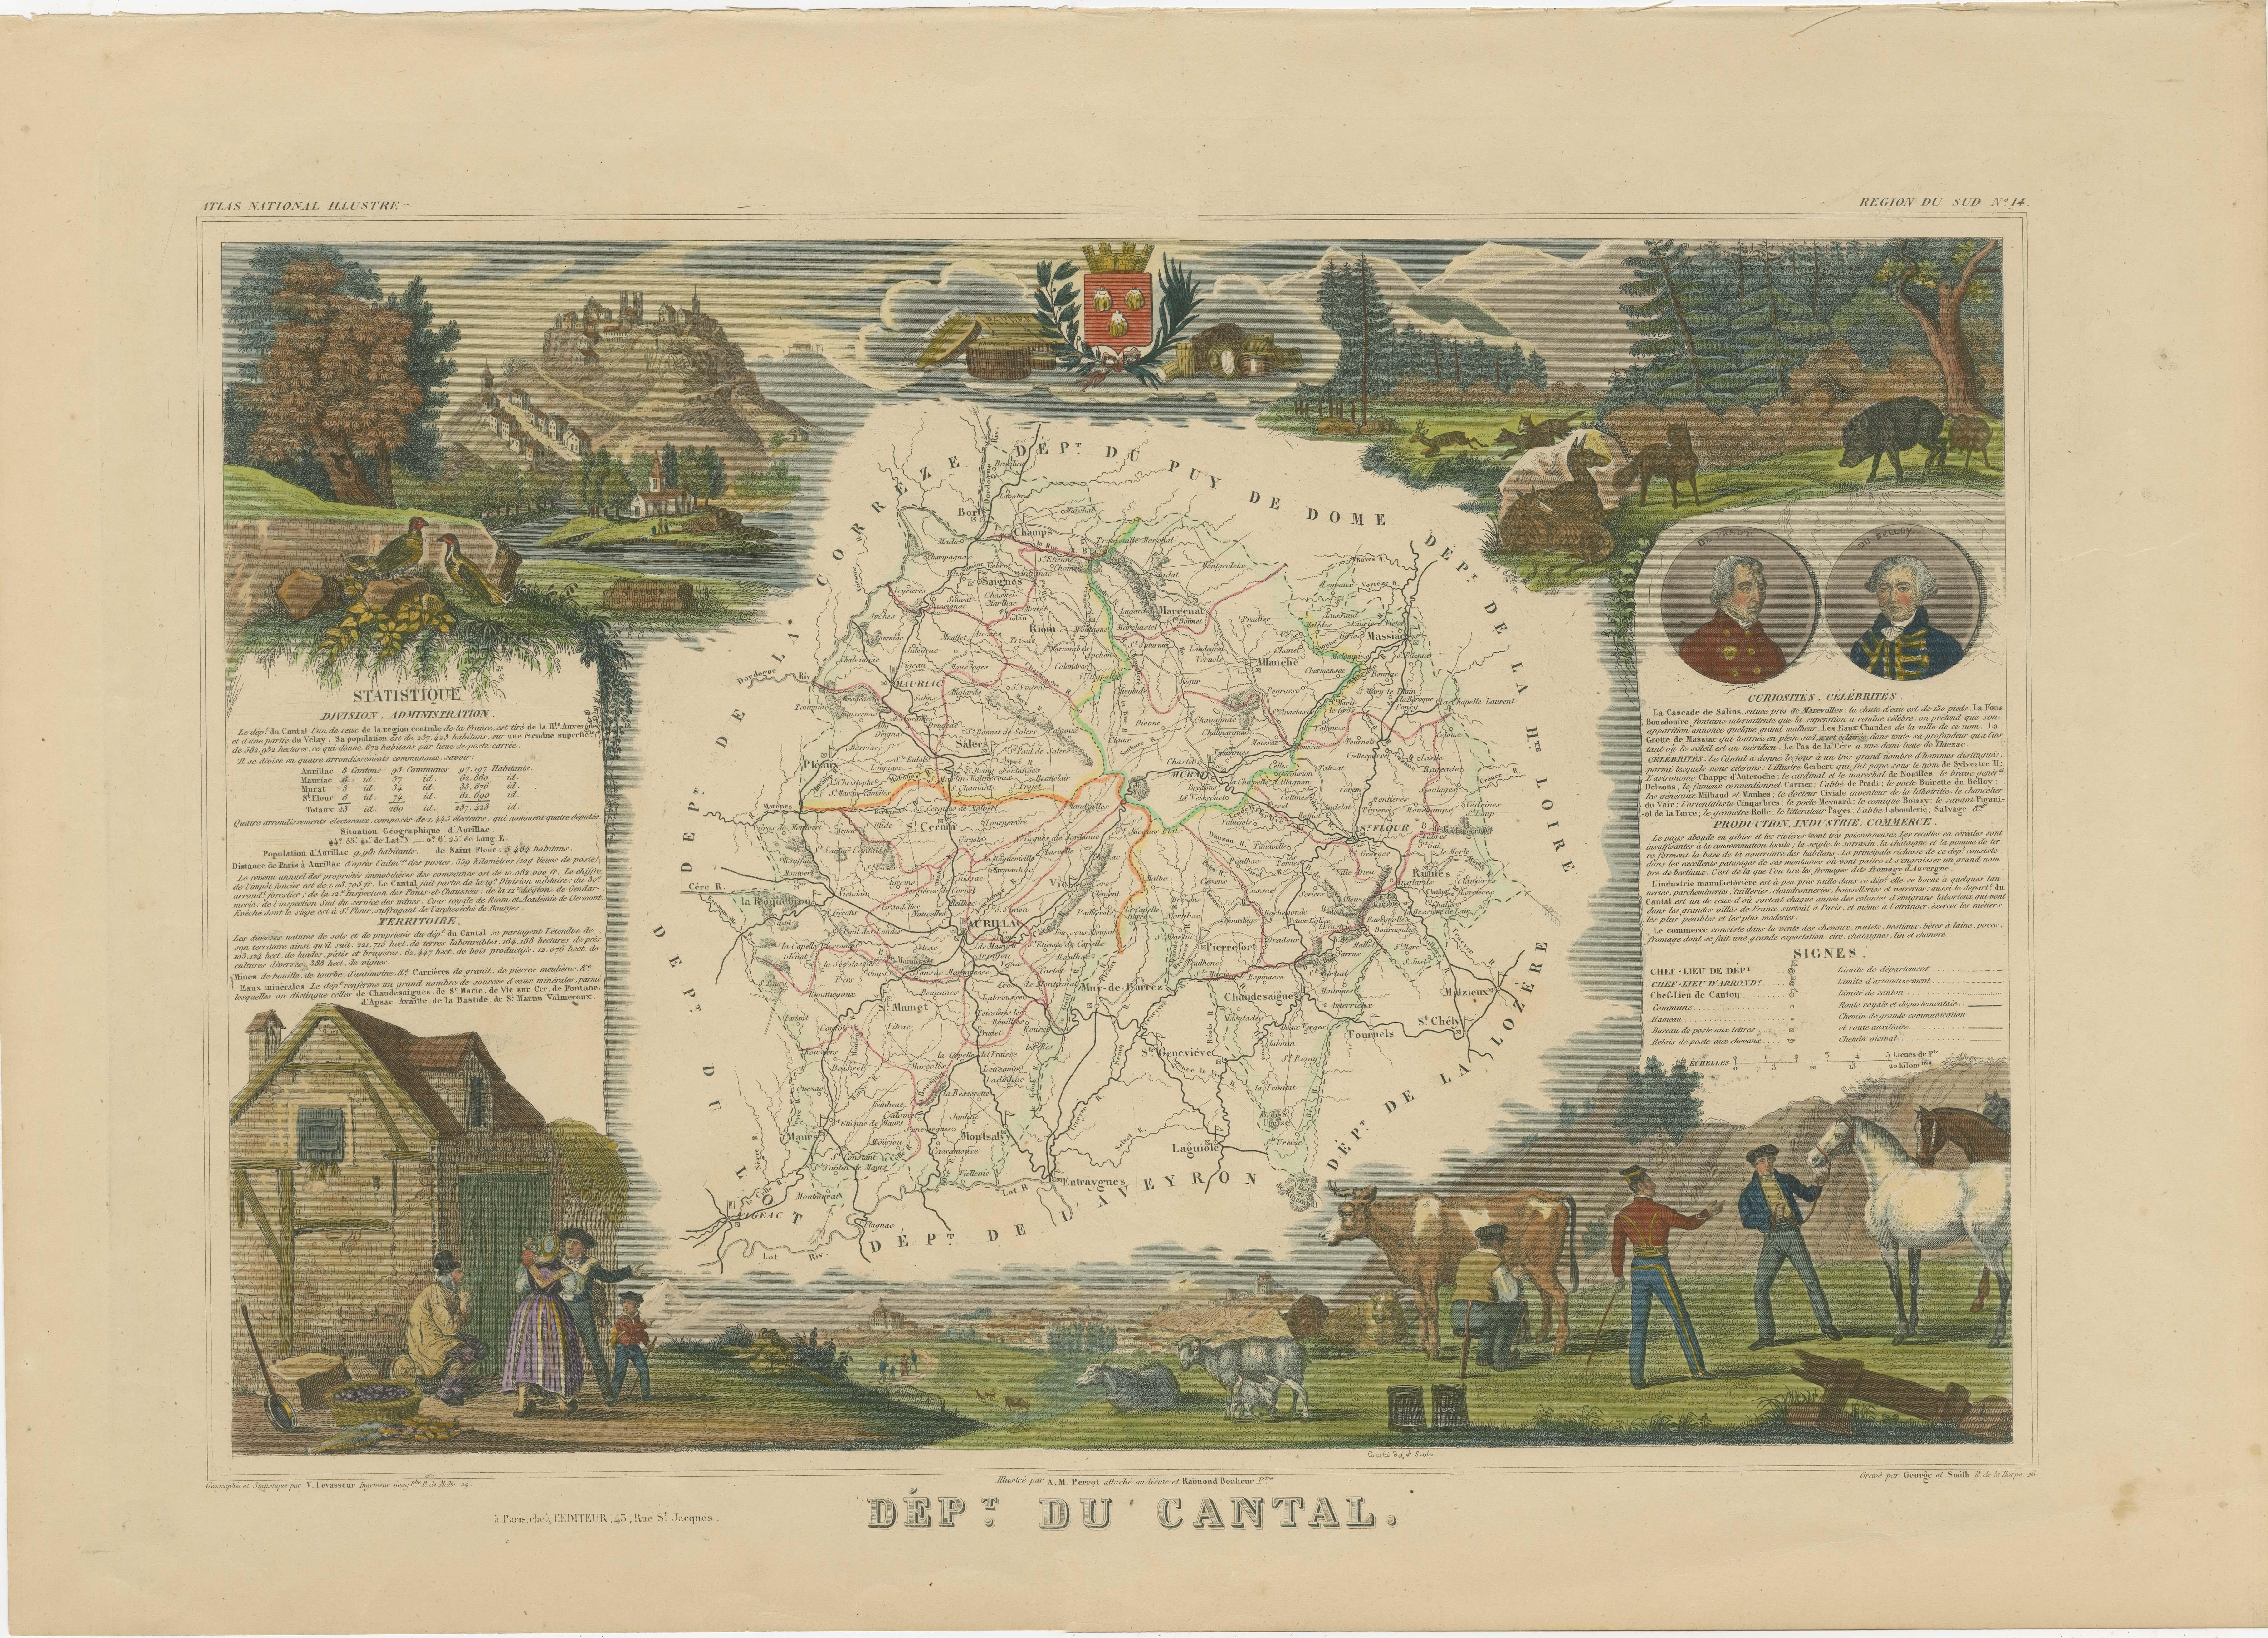 Antique map titled 'Dépt. du Cantal'. Map of the French department of Cantal, France. This area of France is known for its production of Cantal, a firm cheese, named after the region. The whole is surrounded by elaborate decorative engravings